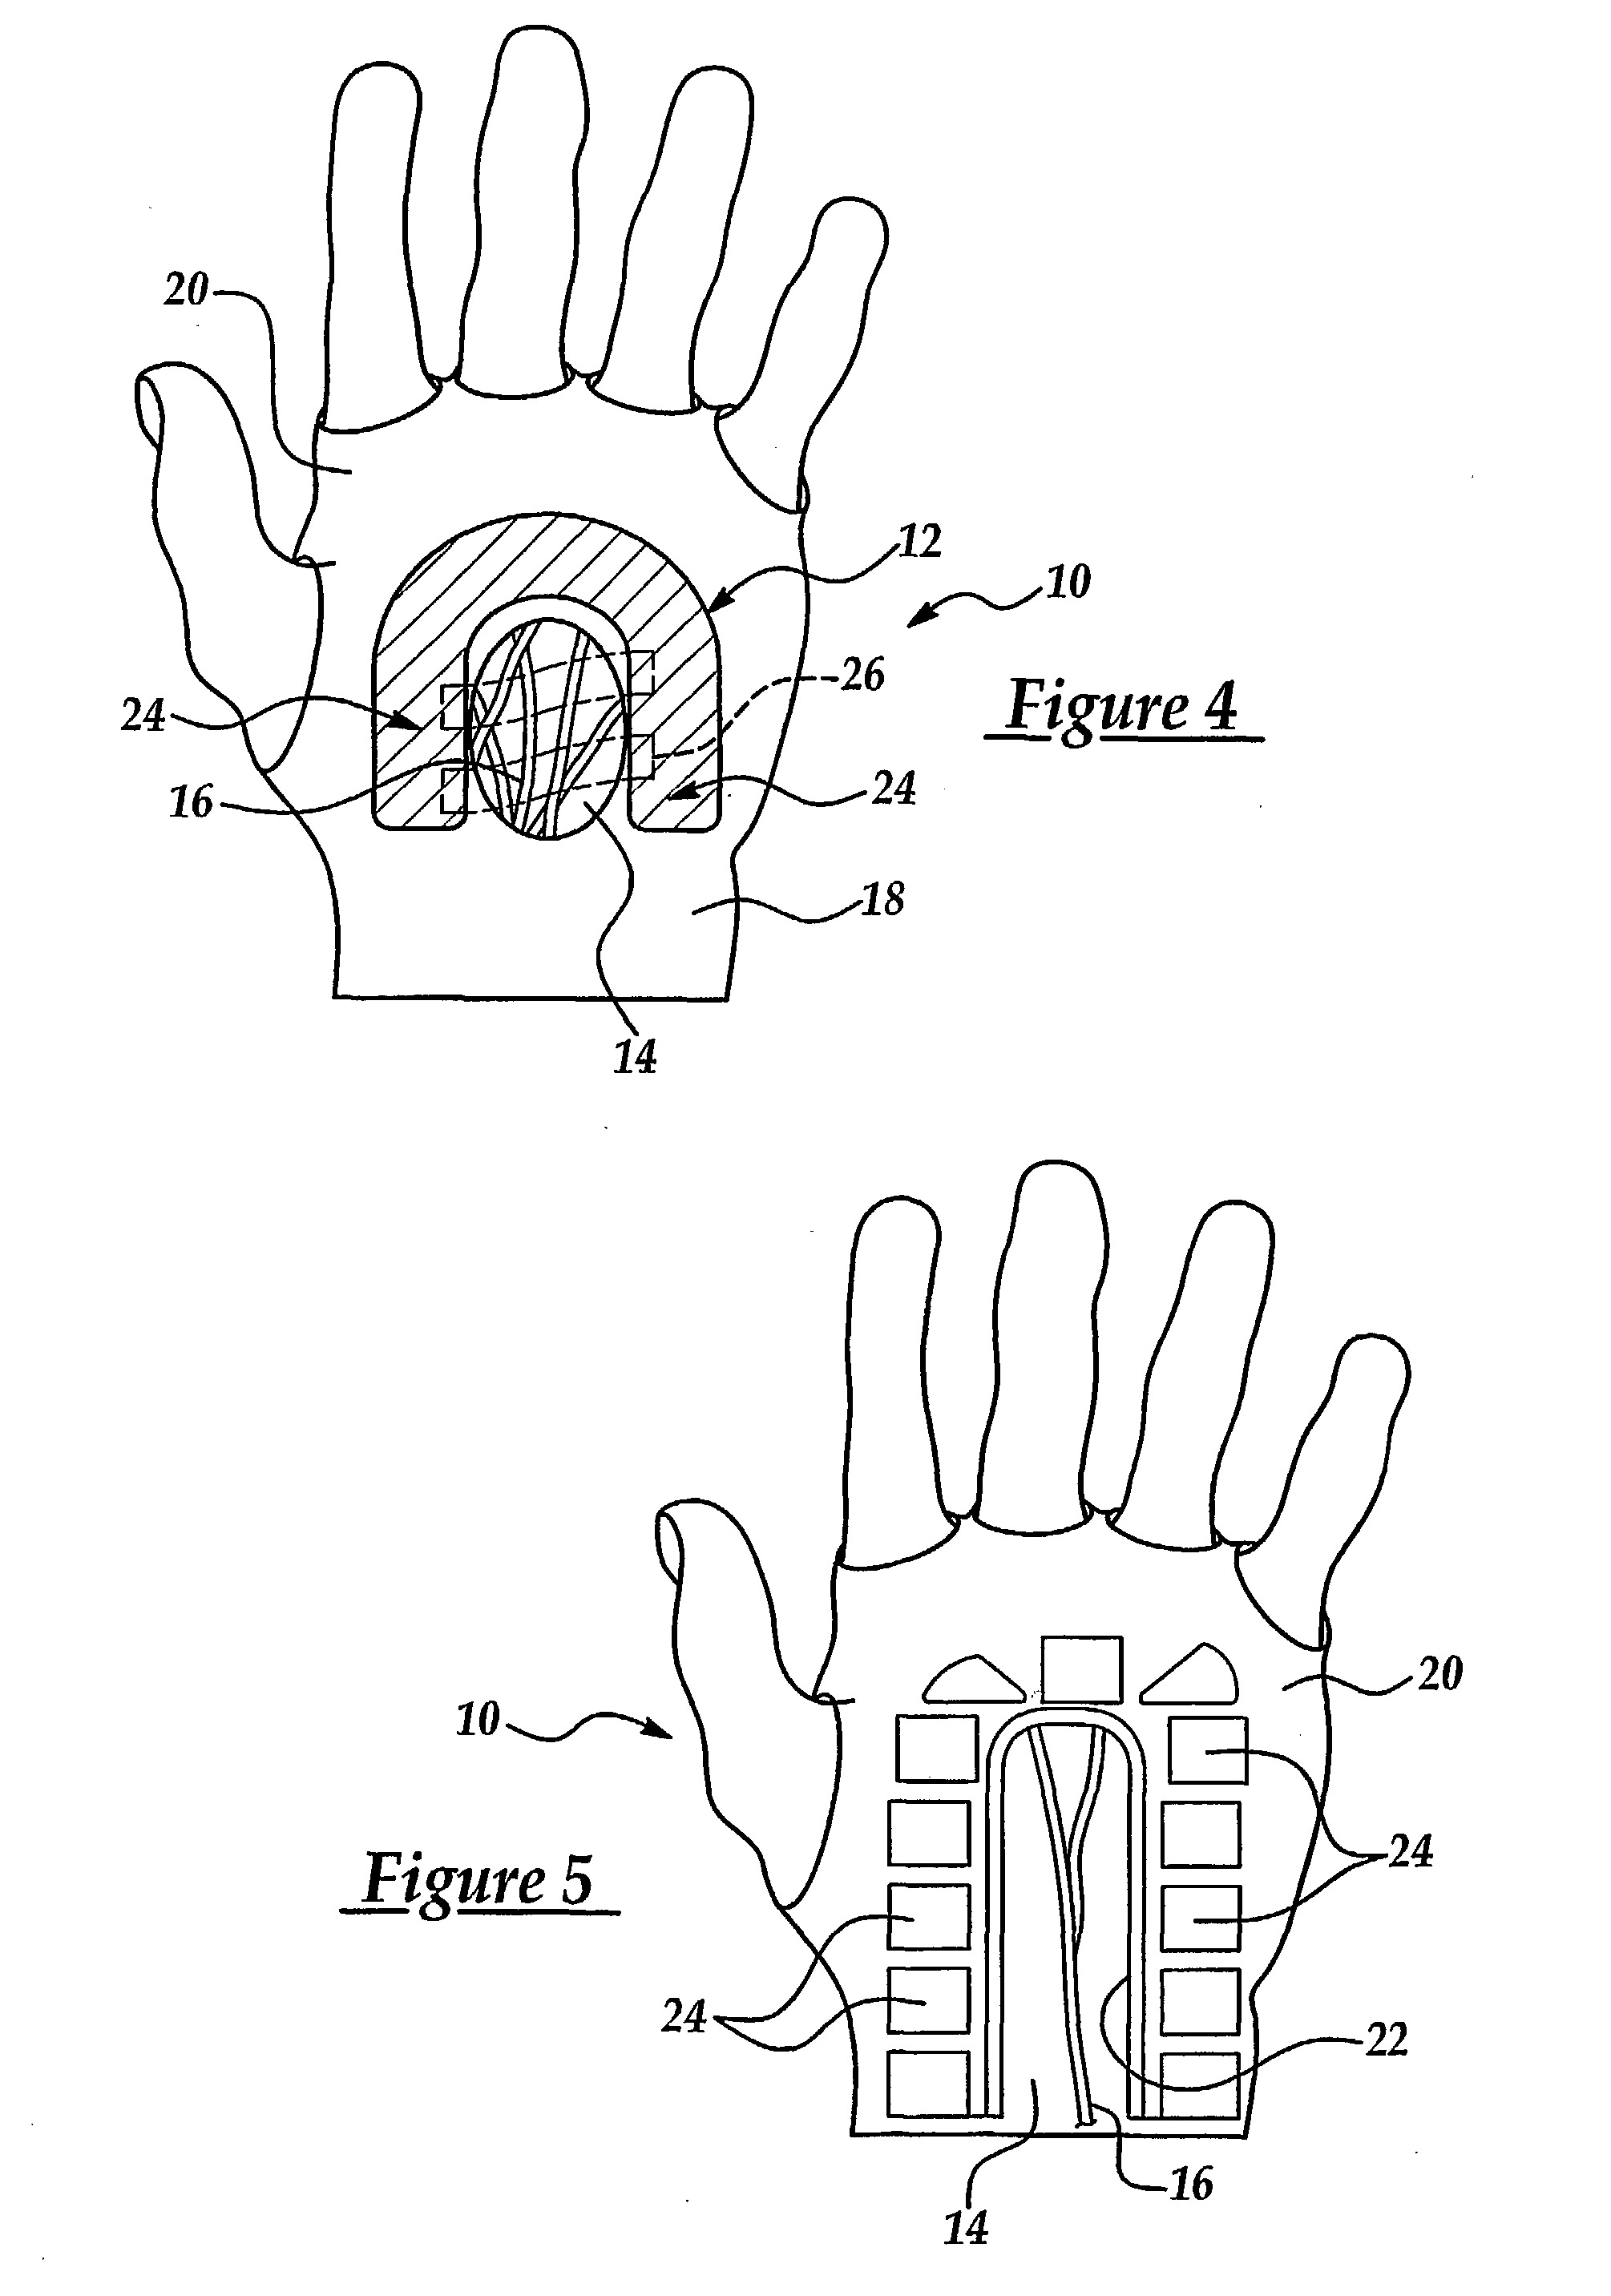 Pad for vibration dampening and carpel tunnel syndrome prevention